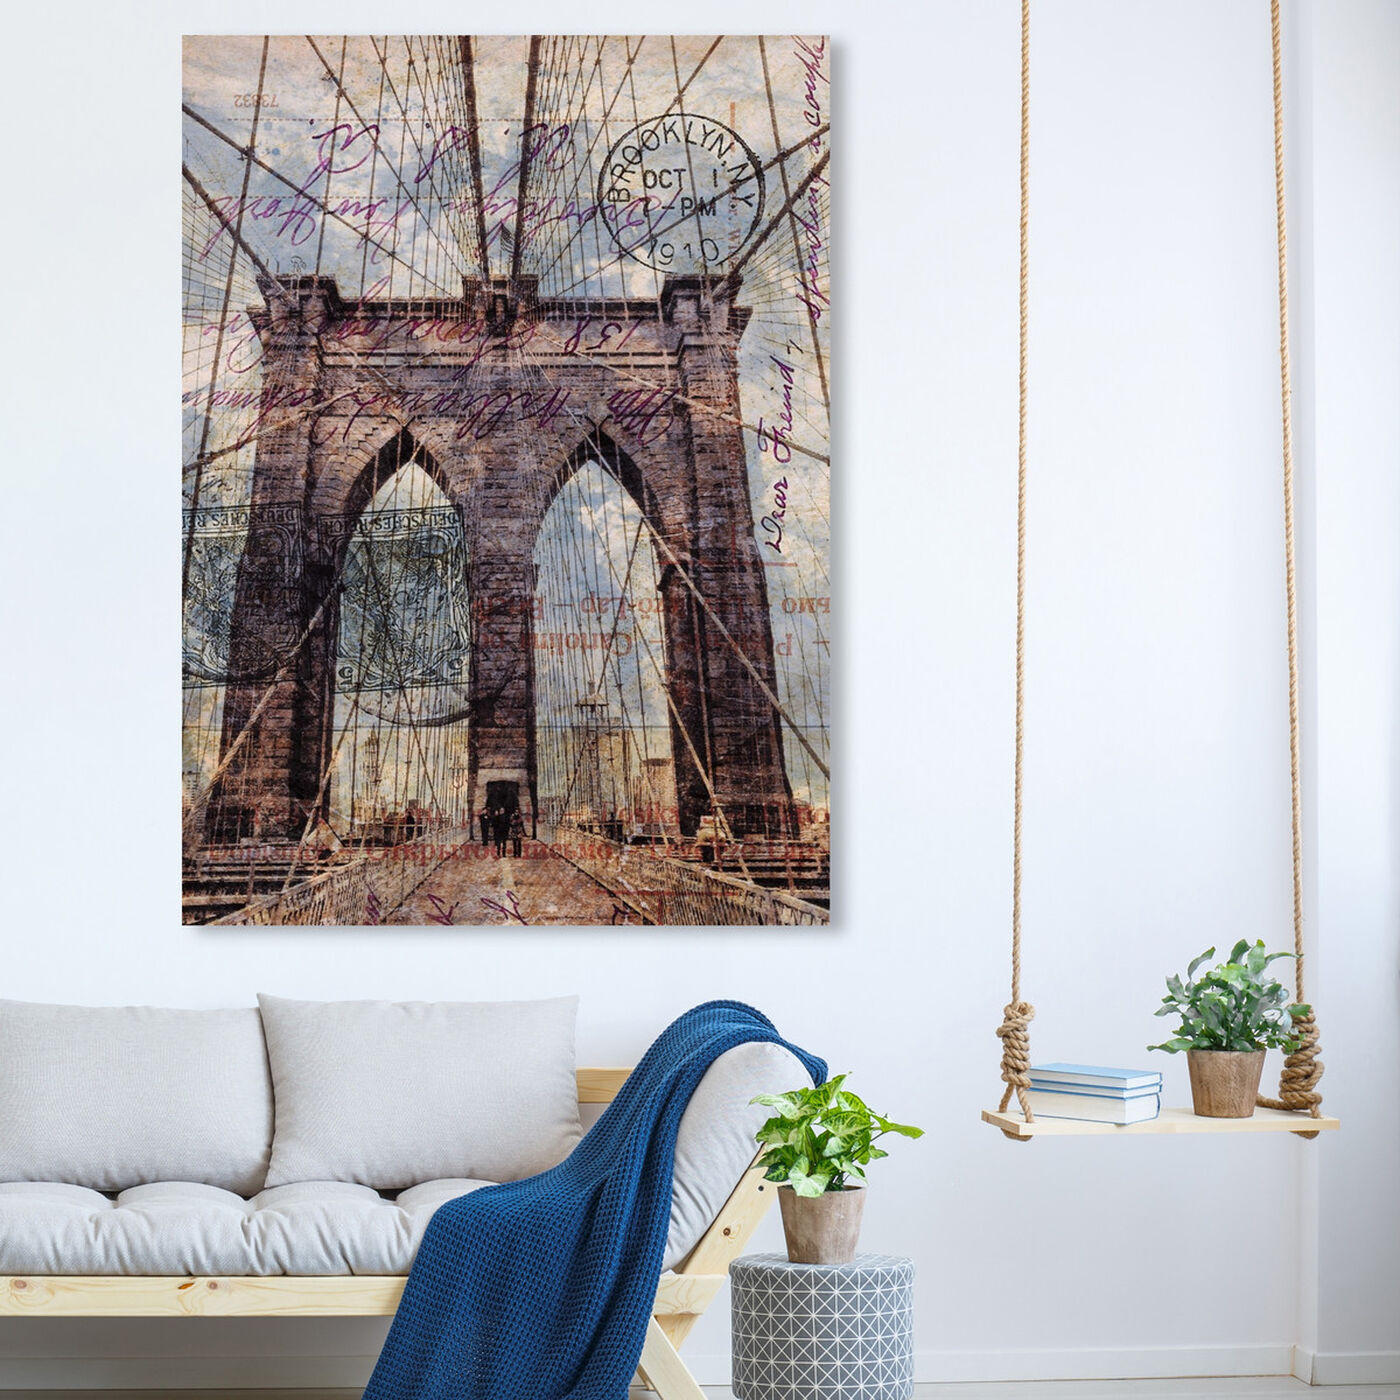 Hanging view of Brooklyn Bridge featuring architecture and buildings and famous bridges art.